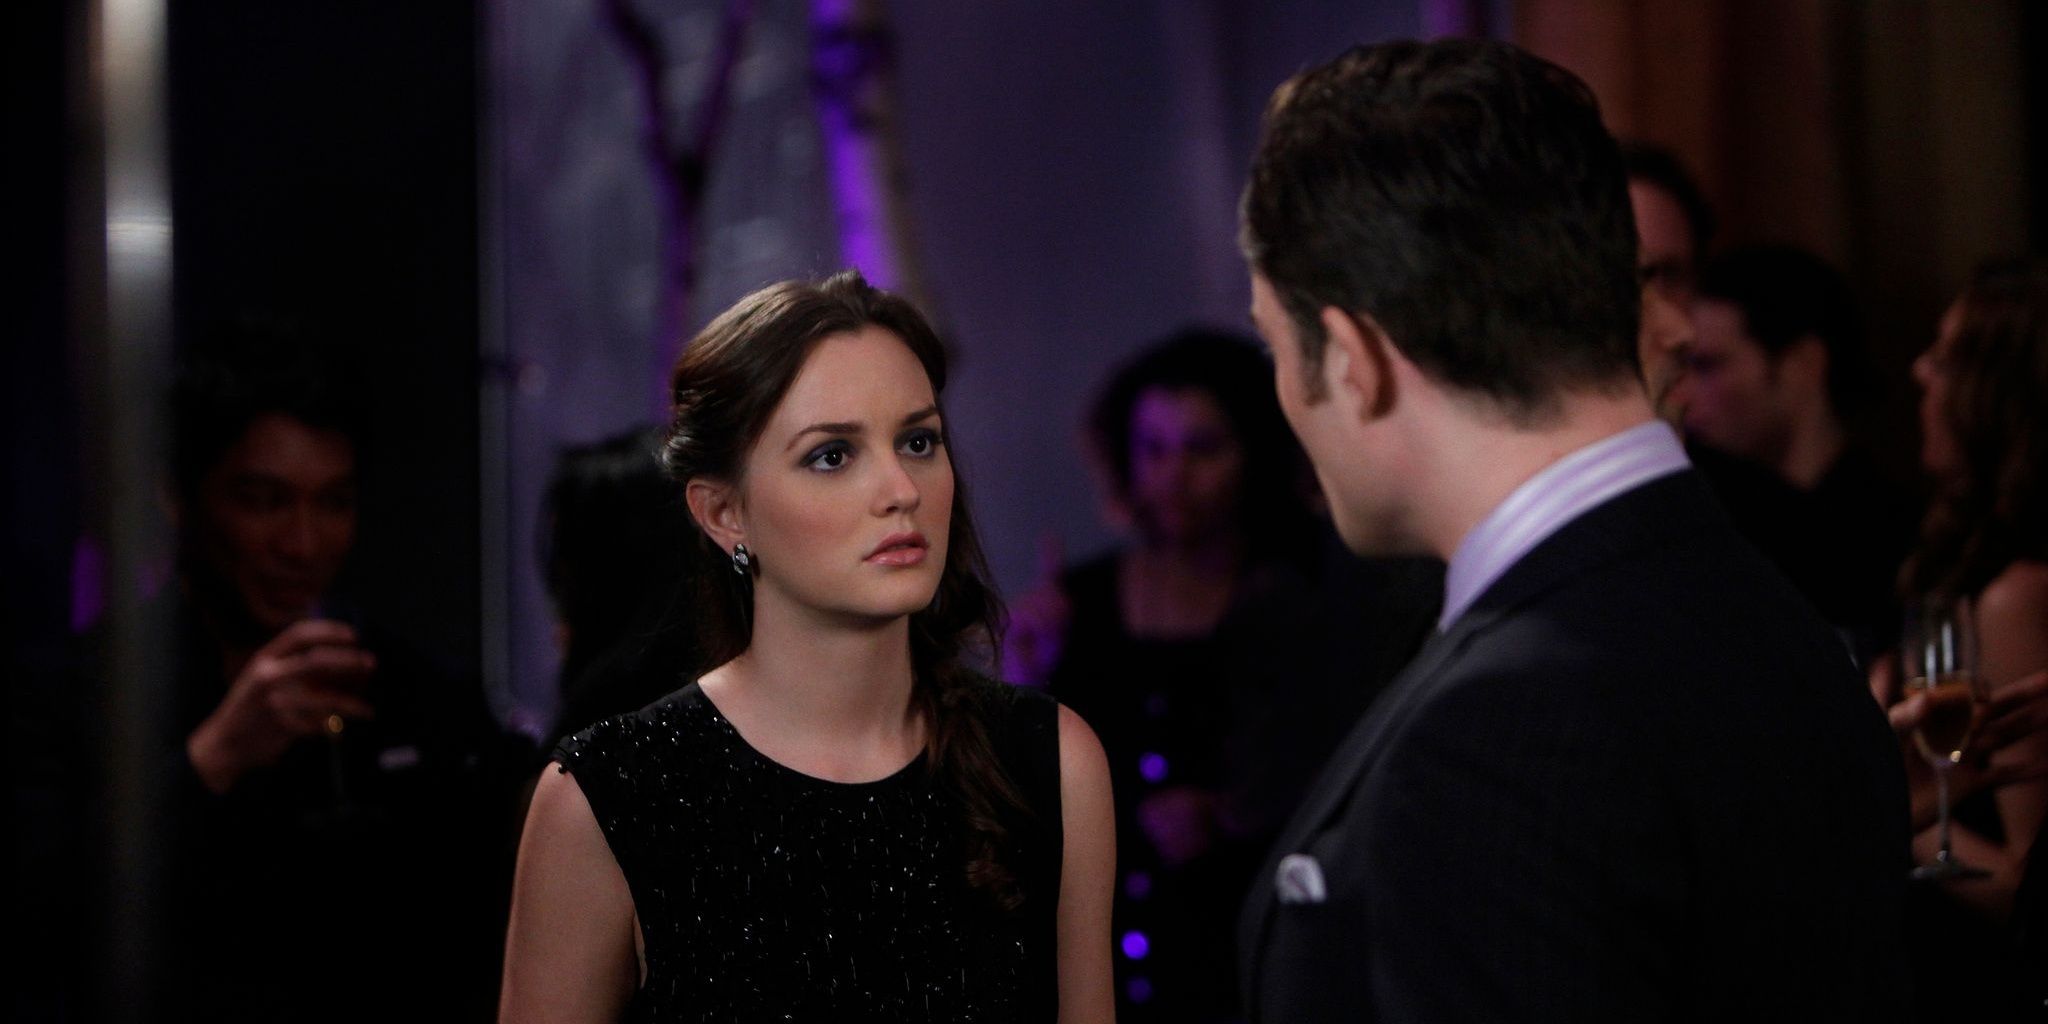 Blair and Chuck arguing in Gossip Girl